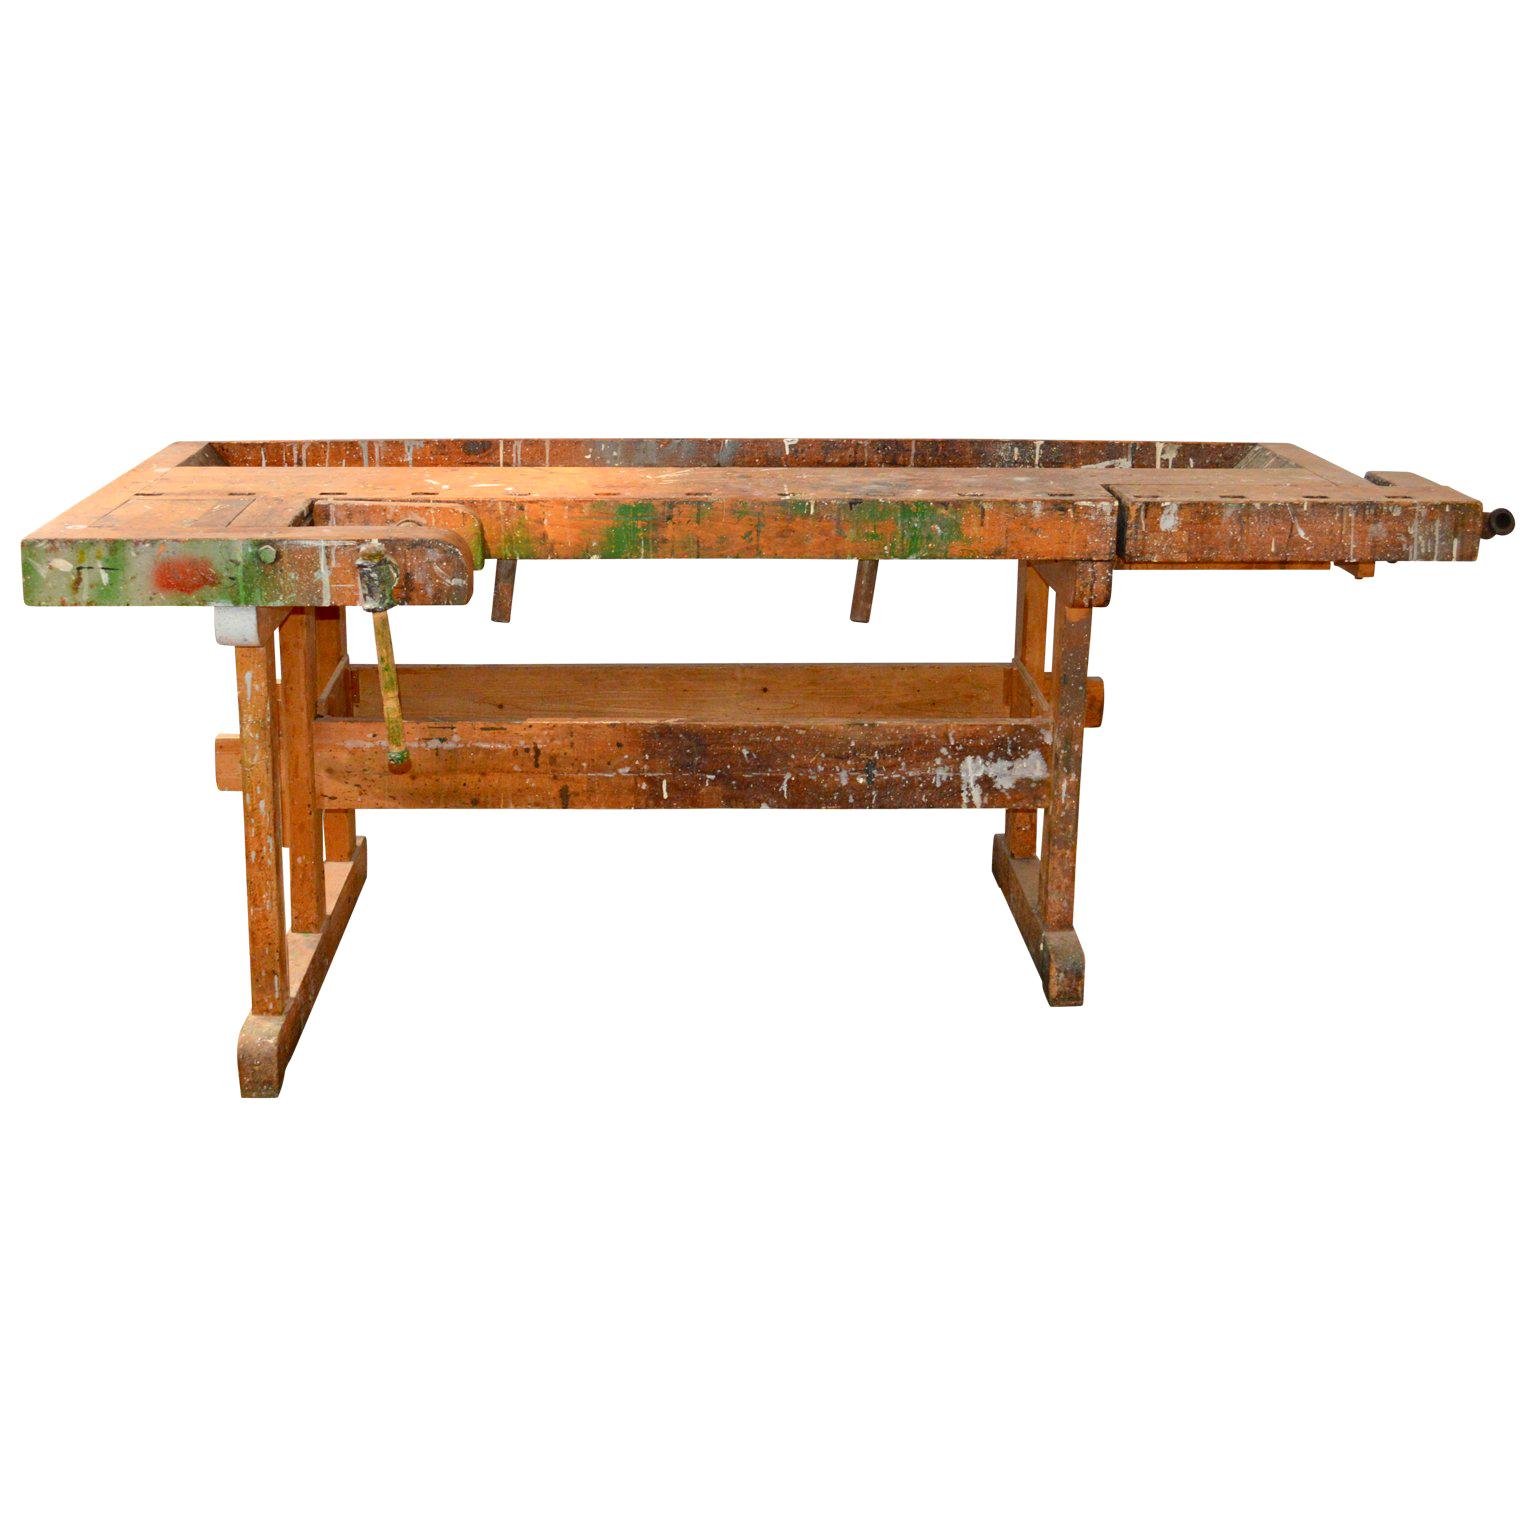 Danish carpenters' workbench, bearing an incredible patina after years of traditional use. Please examine the close up photos. It has two wooden vices with wood handle and a recessed tray where the carpenter would lay his tools. The traditional